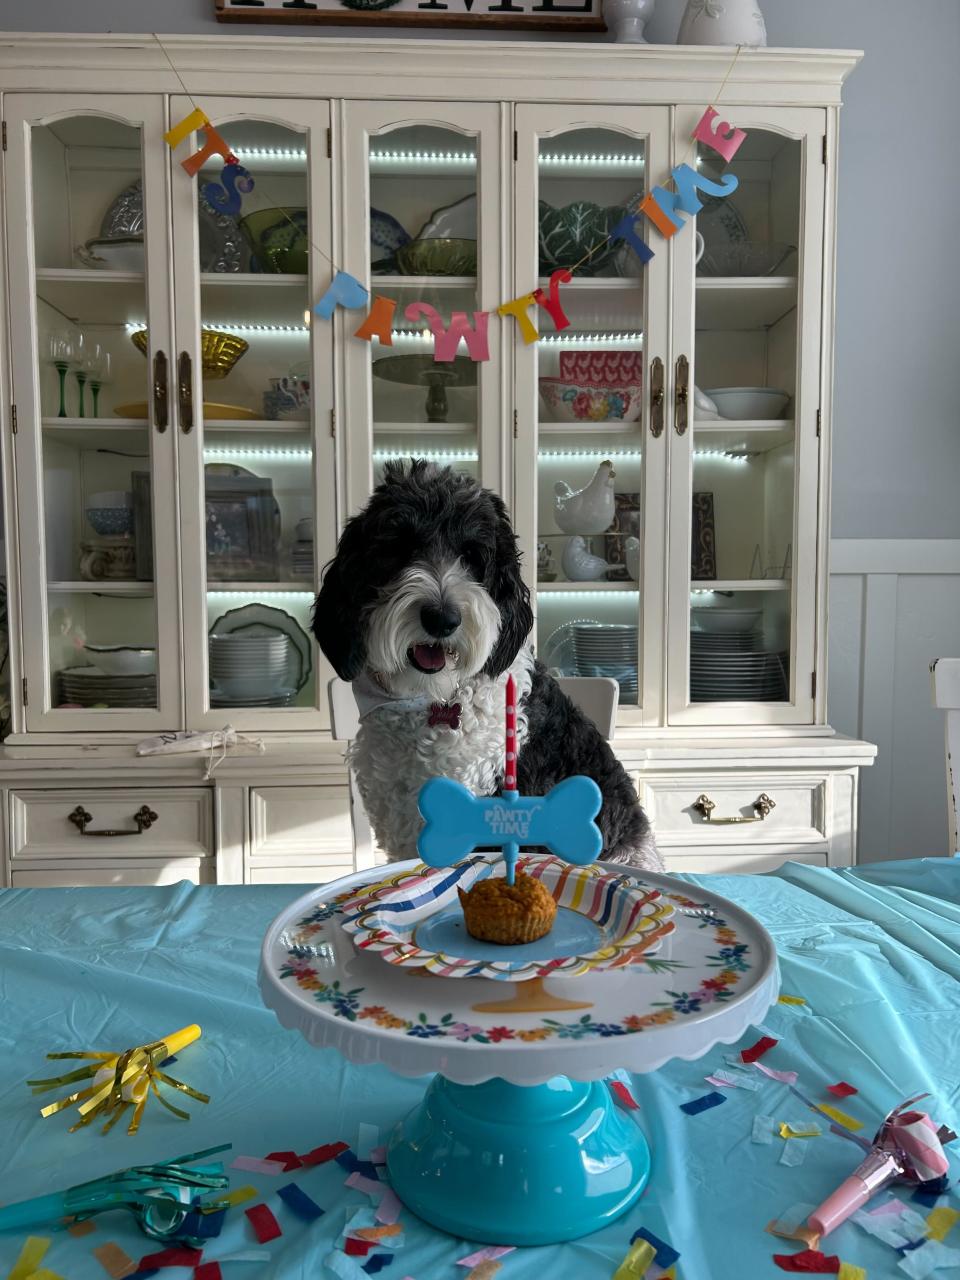 Nala celebrates her third birthday on June 21 with a doggy treat and decorations. It was a real “pawty.”